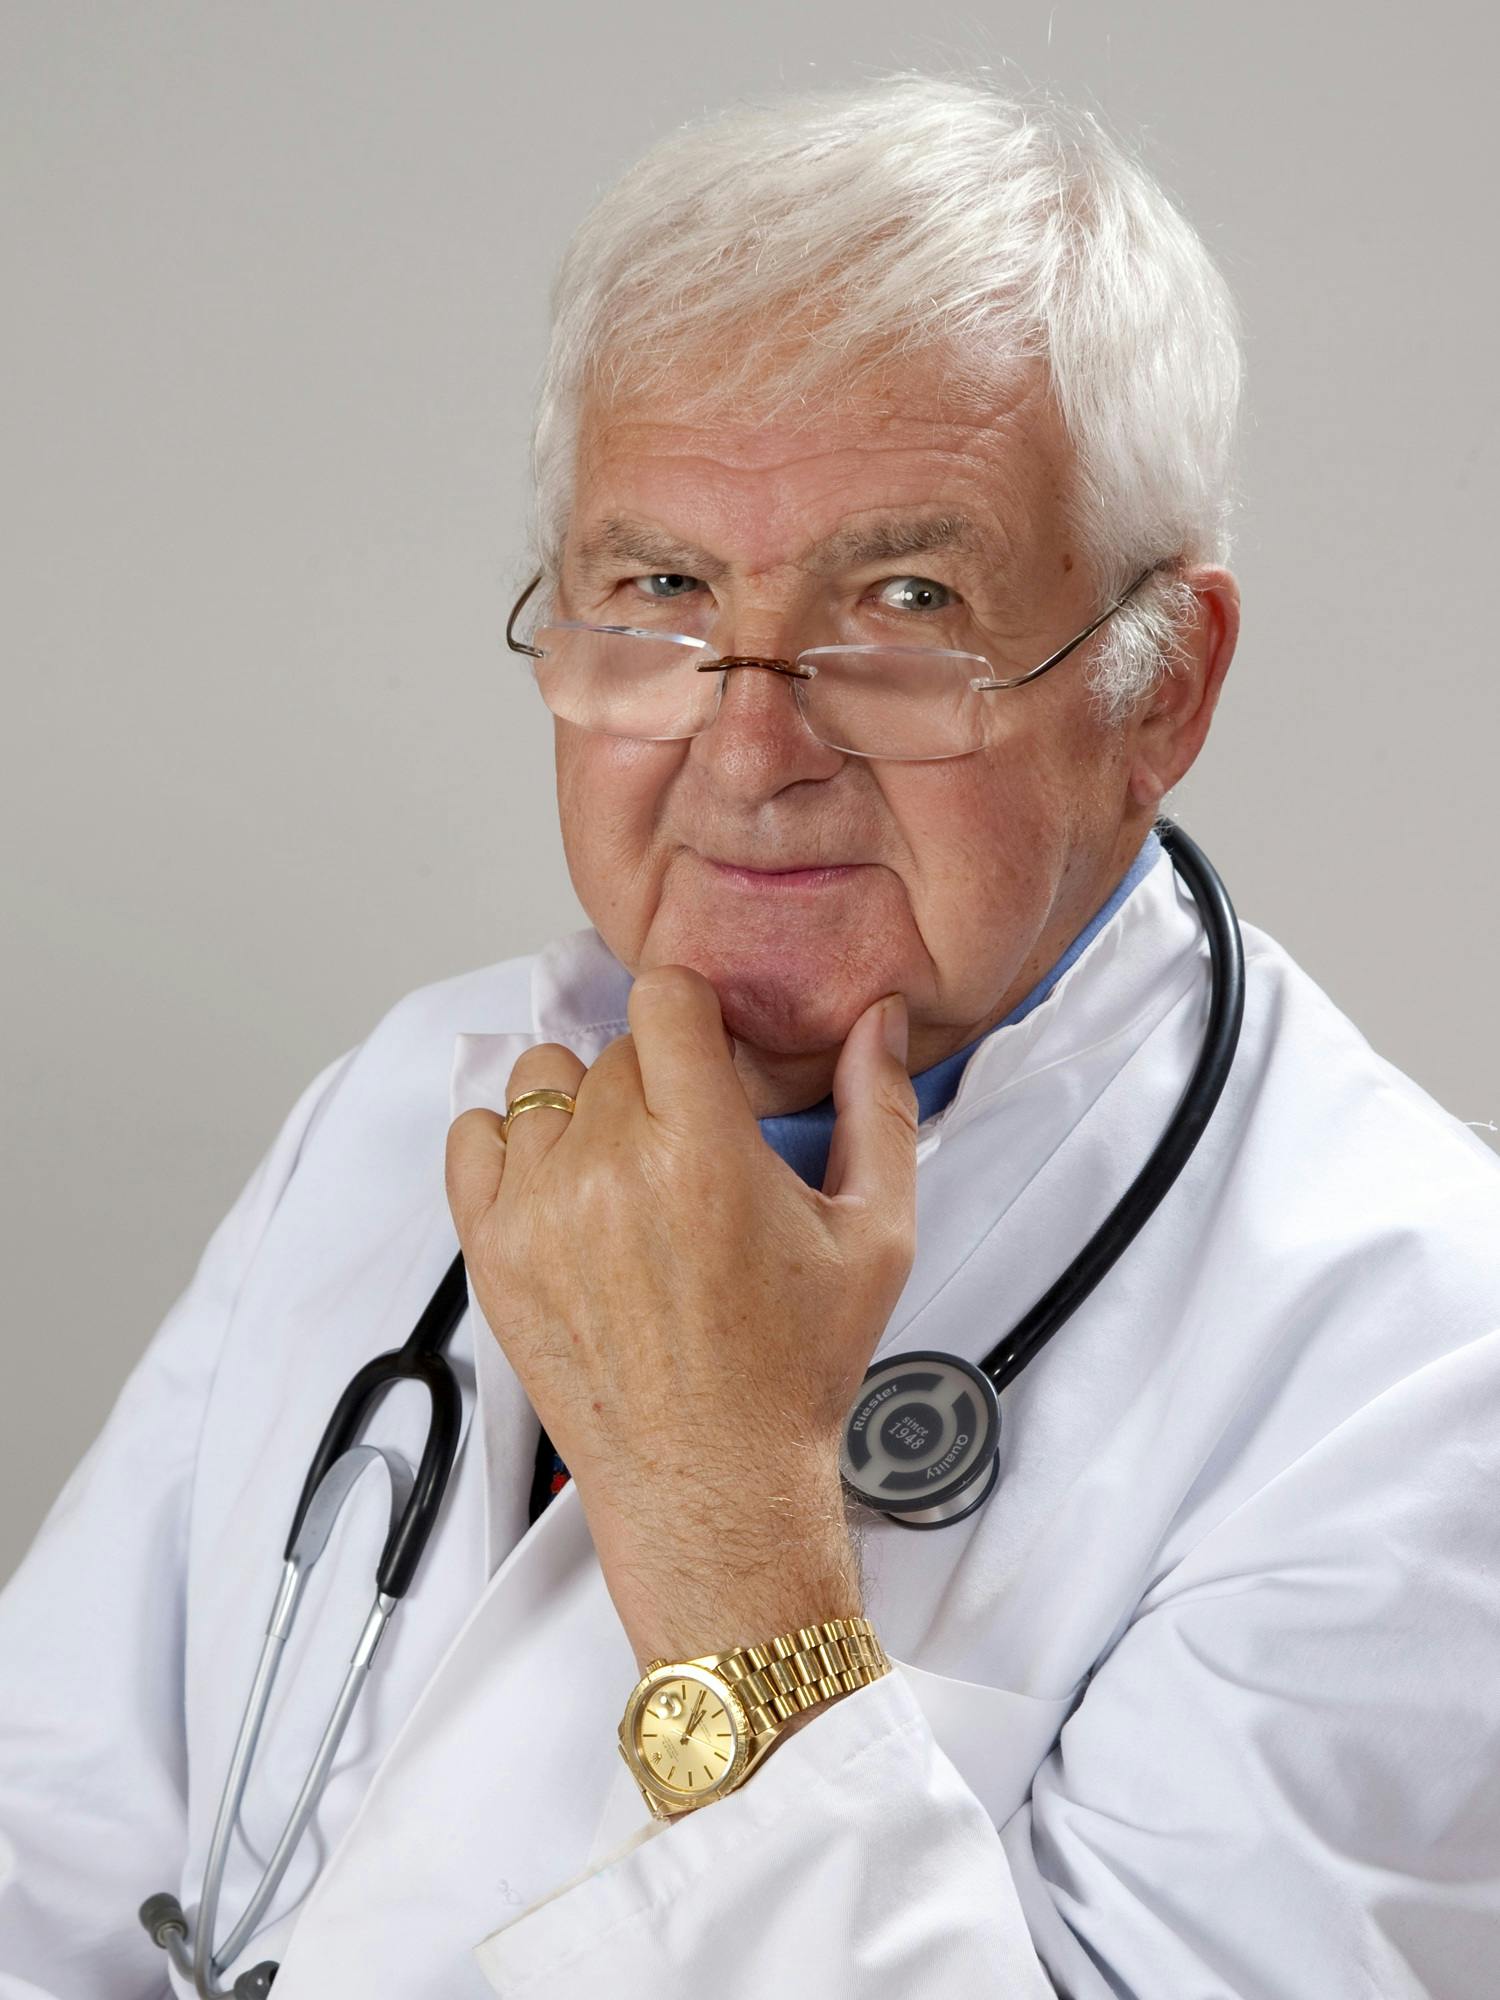 Doctor carrying stethoscope | Photo: Pexels